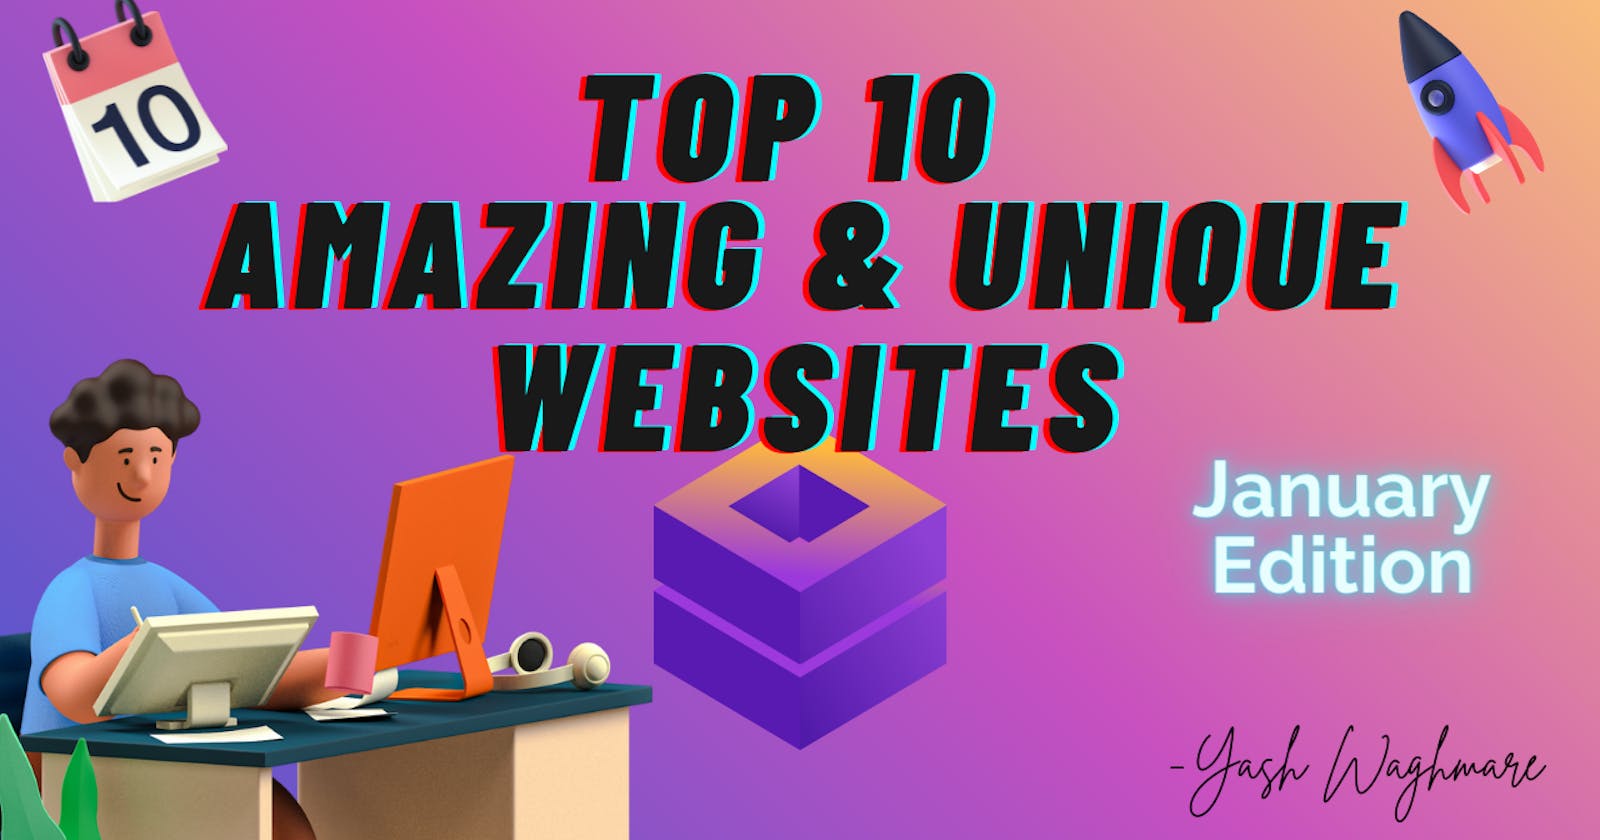 Top 10 Amazing and Unique Websites for Developers | January 2022 Edition